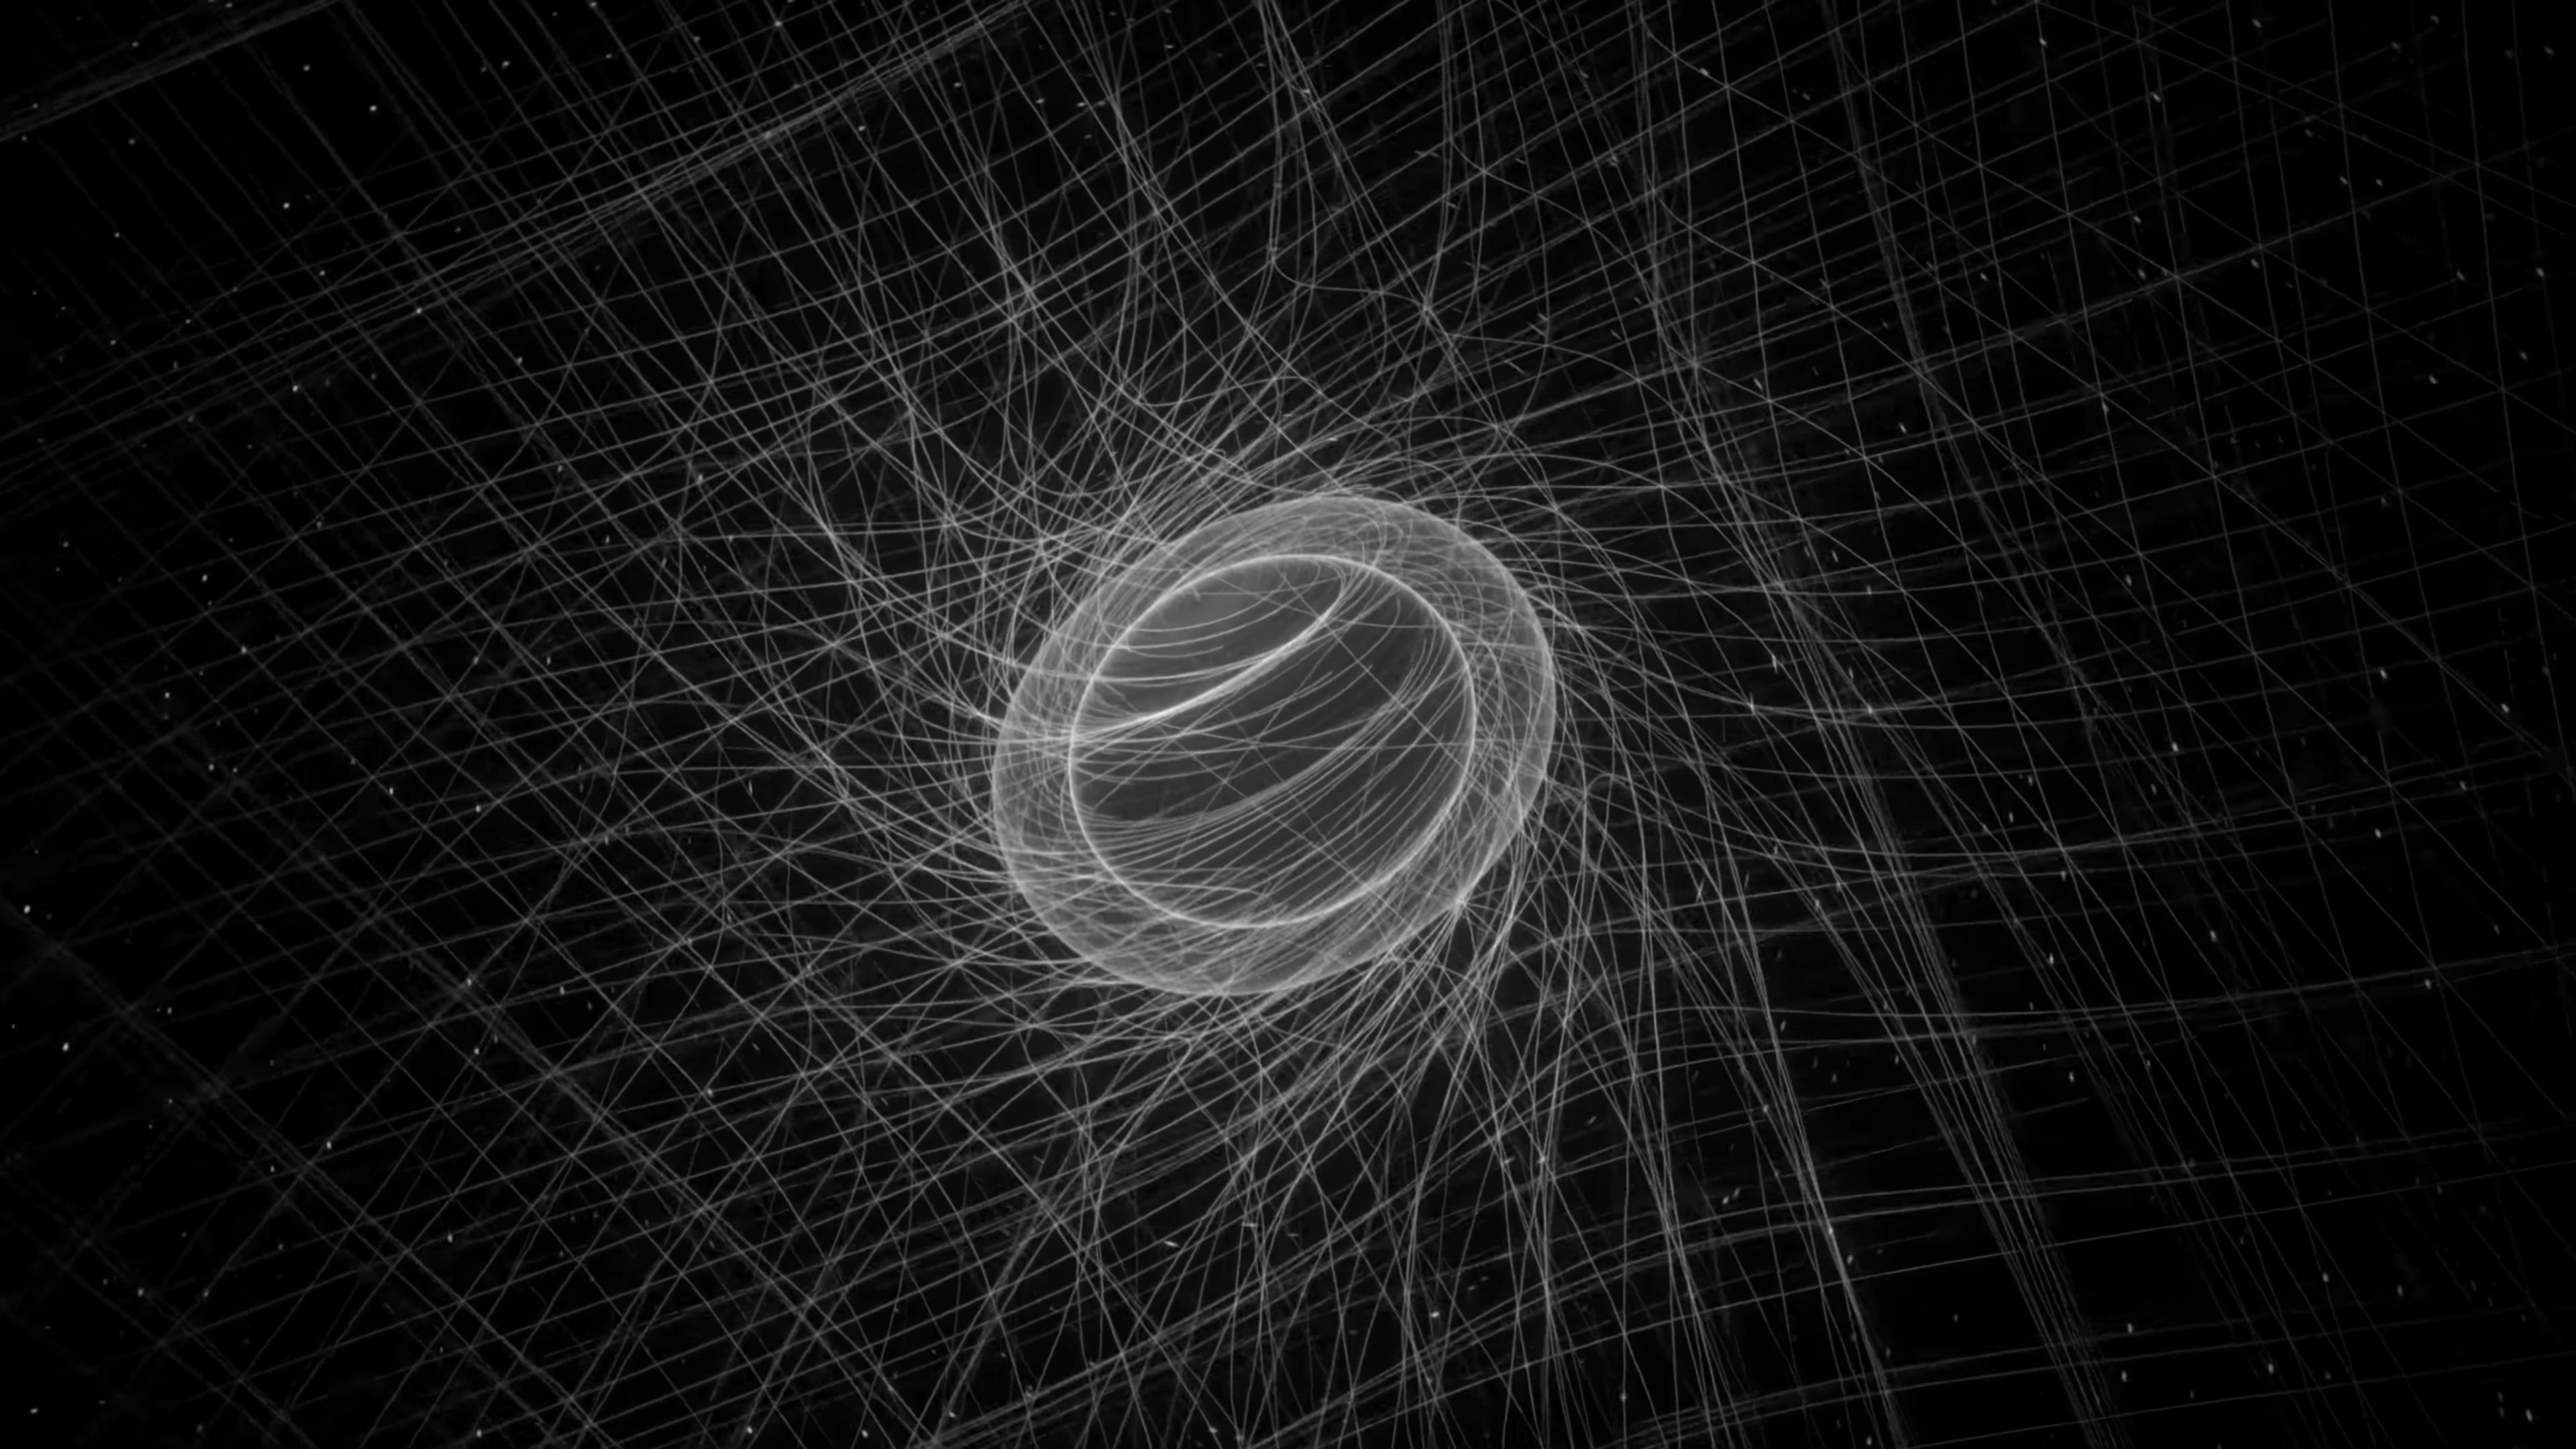 Abstract black-and-white image featuring a spherical shape at the centre surrounded by an intricate web of swirling, crisscrossing lines, creating a three-dimensional effect. The background is dark, enhancing the contrast and emphasising the white lines and central sphere.